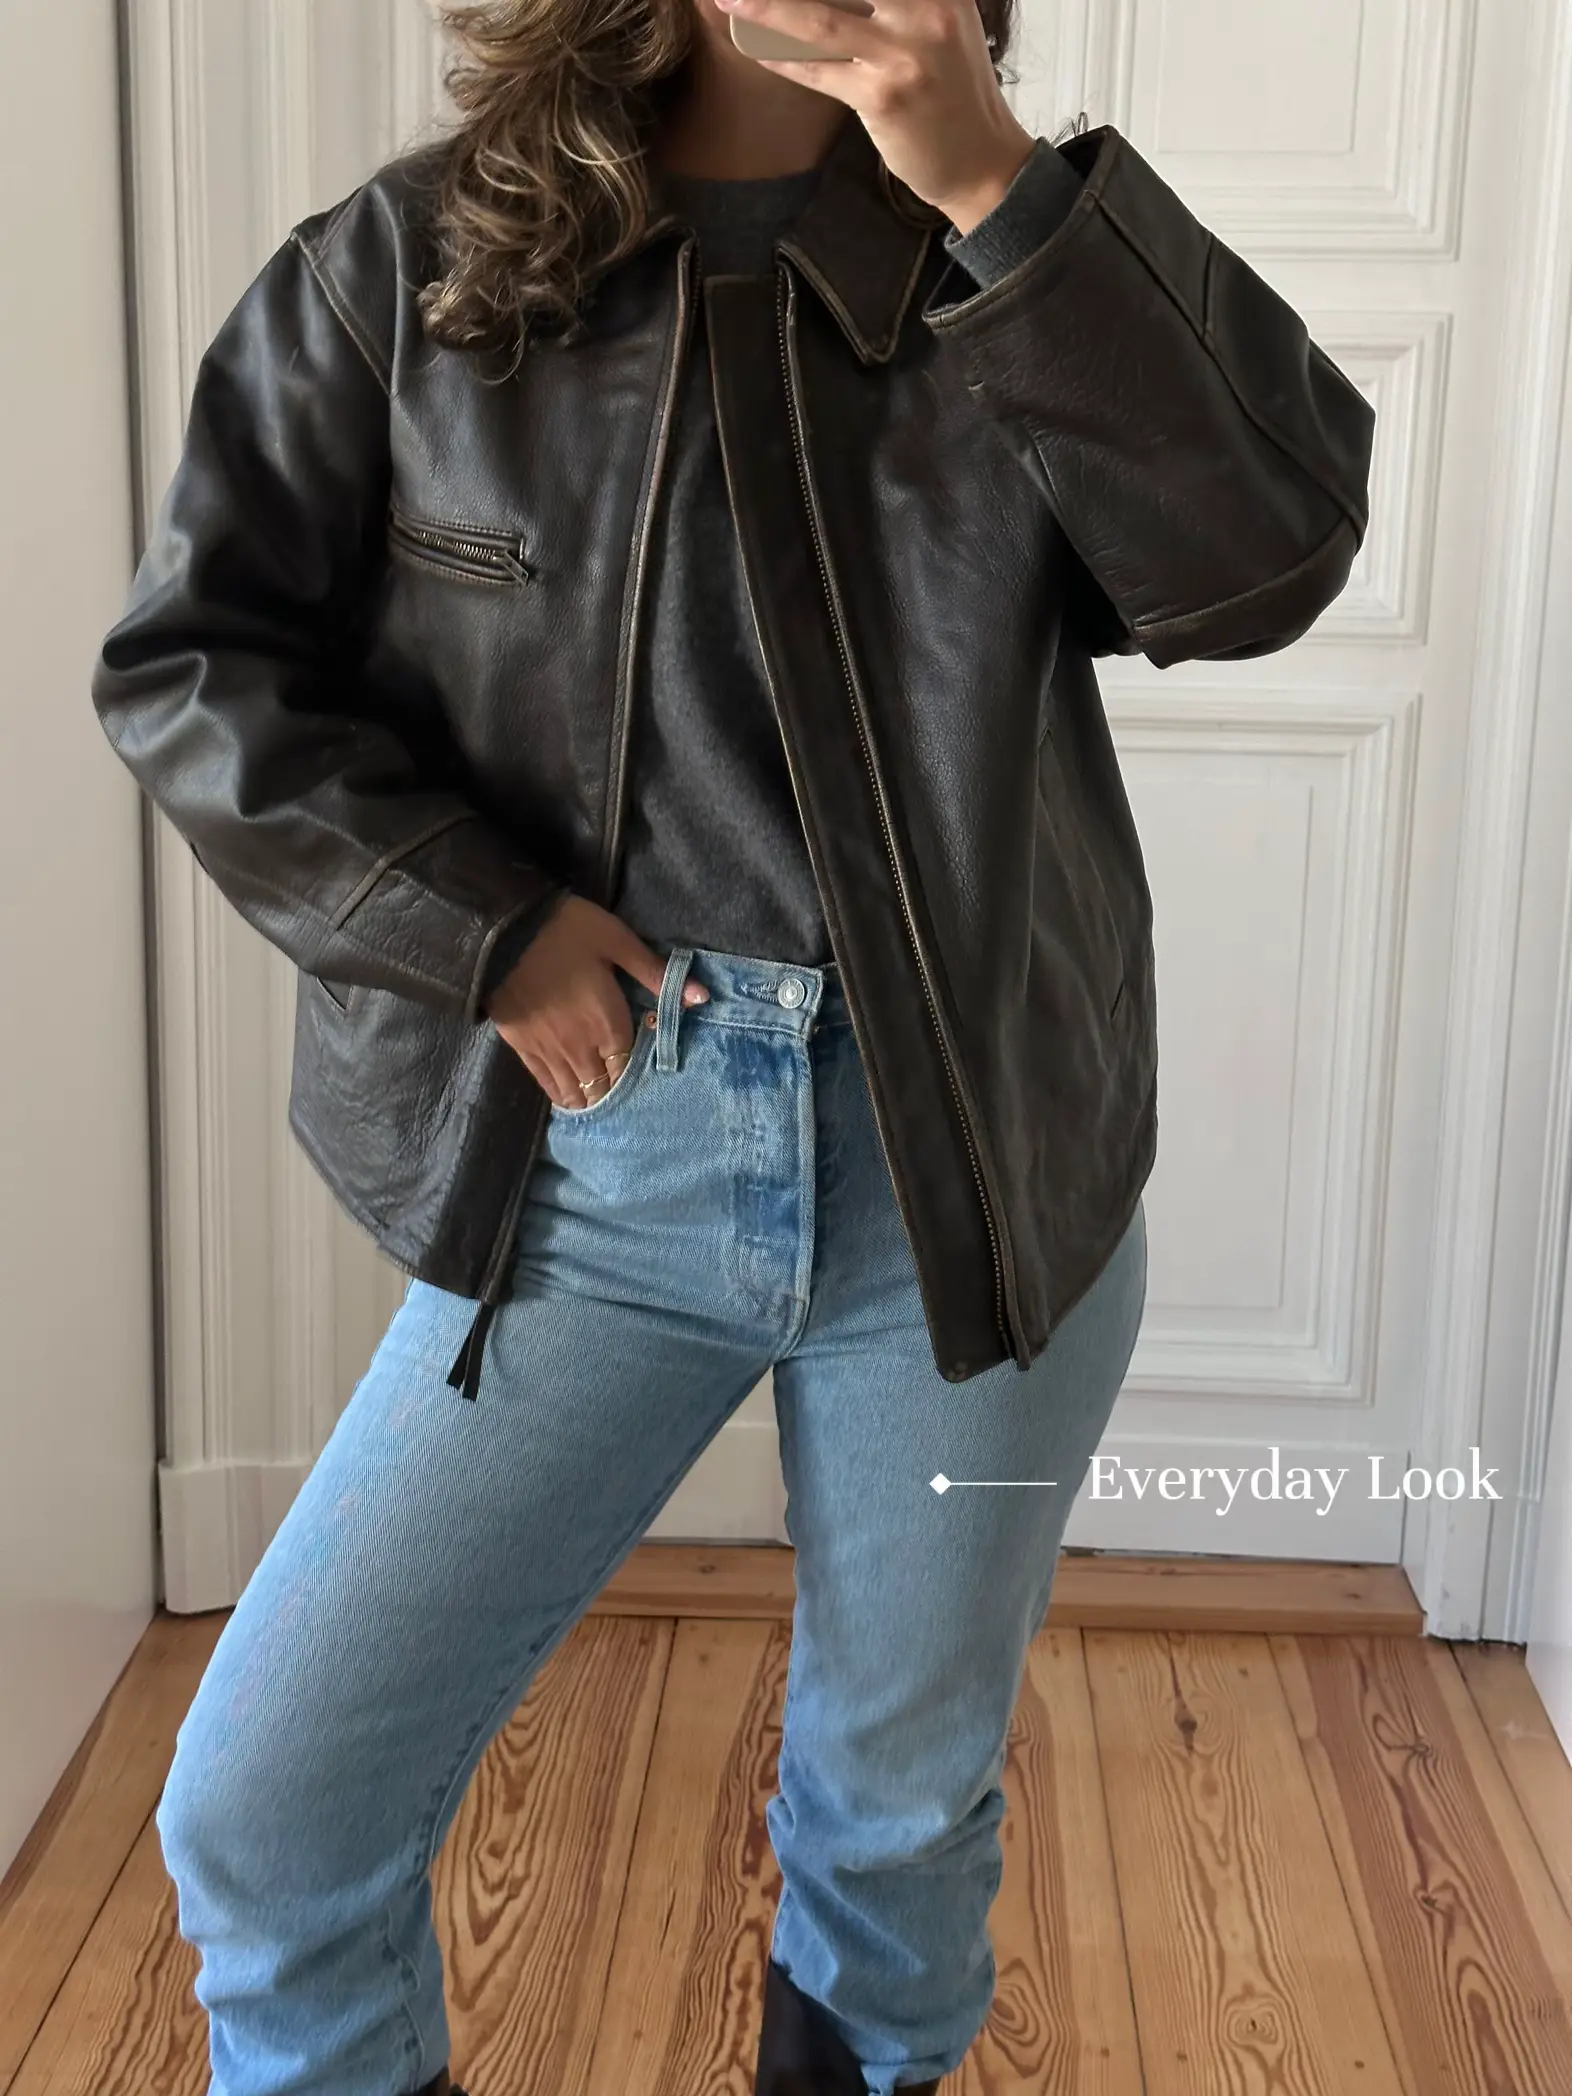 Autumn Trend - Leather jacket | Gallery posted by Bella Emar | Lemon8 | Jacken